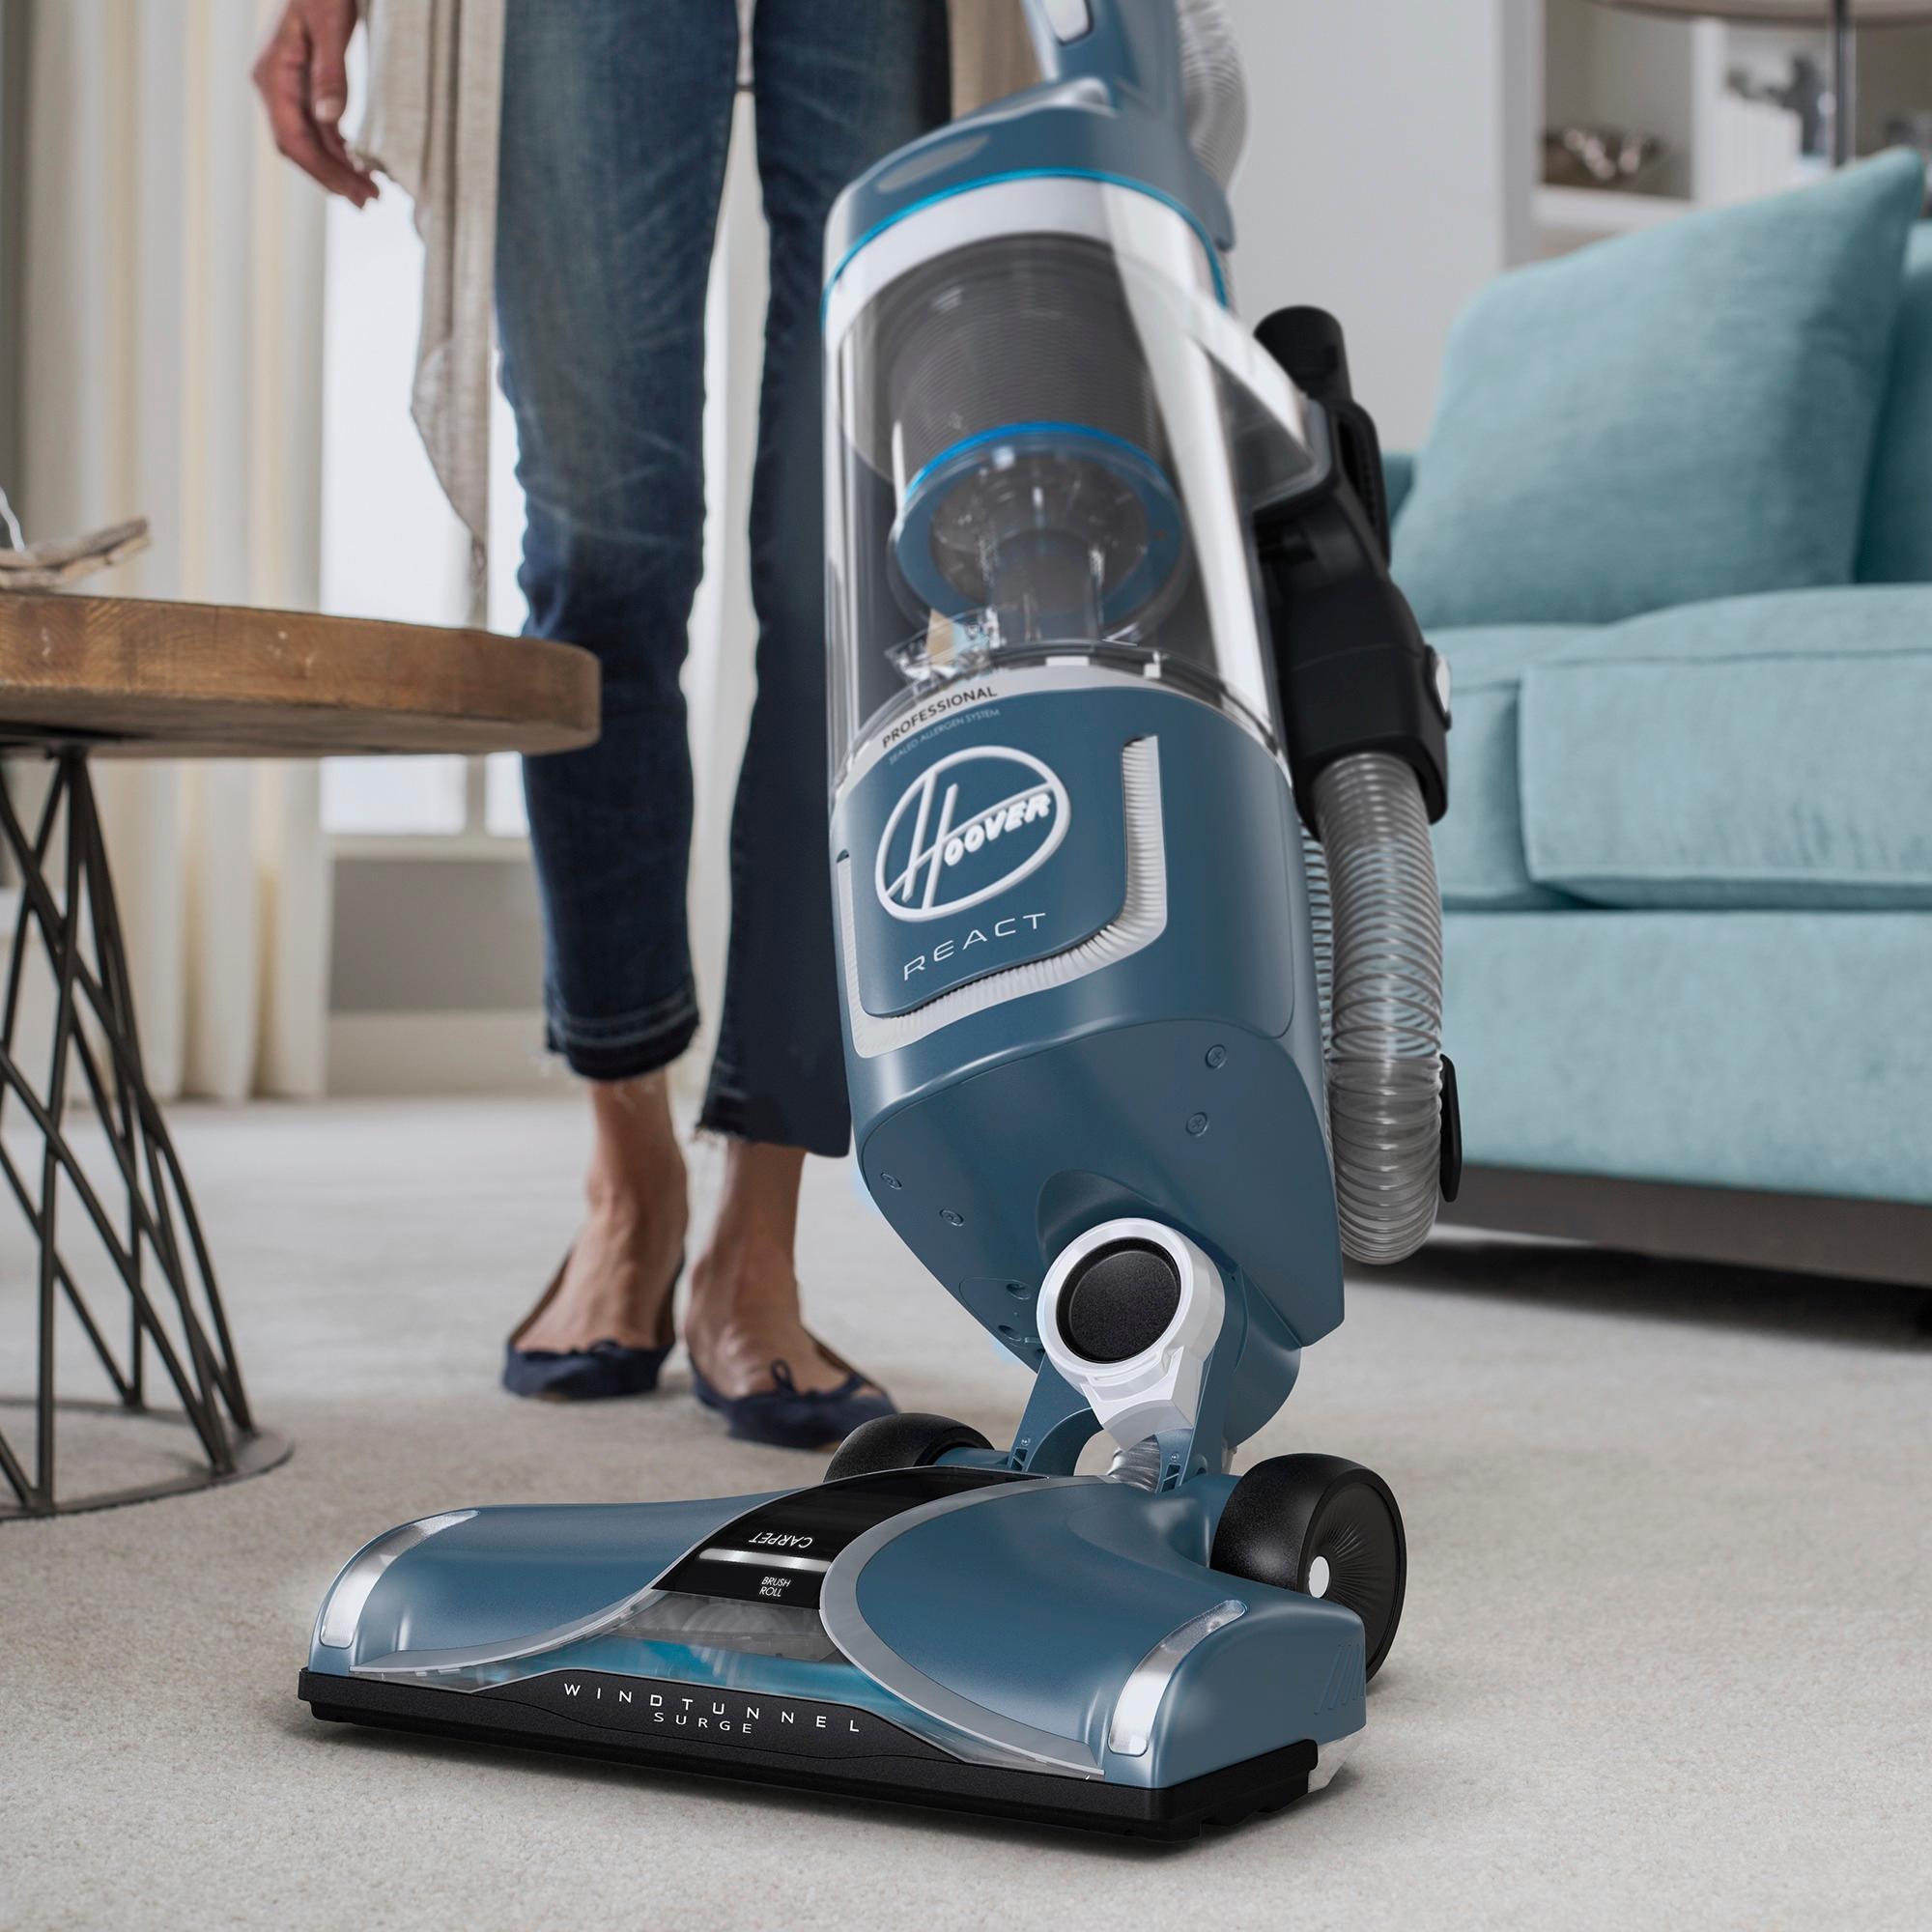 Buy the Hoover REACT Upright Vacuum